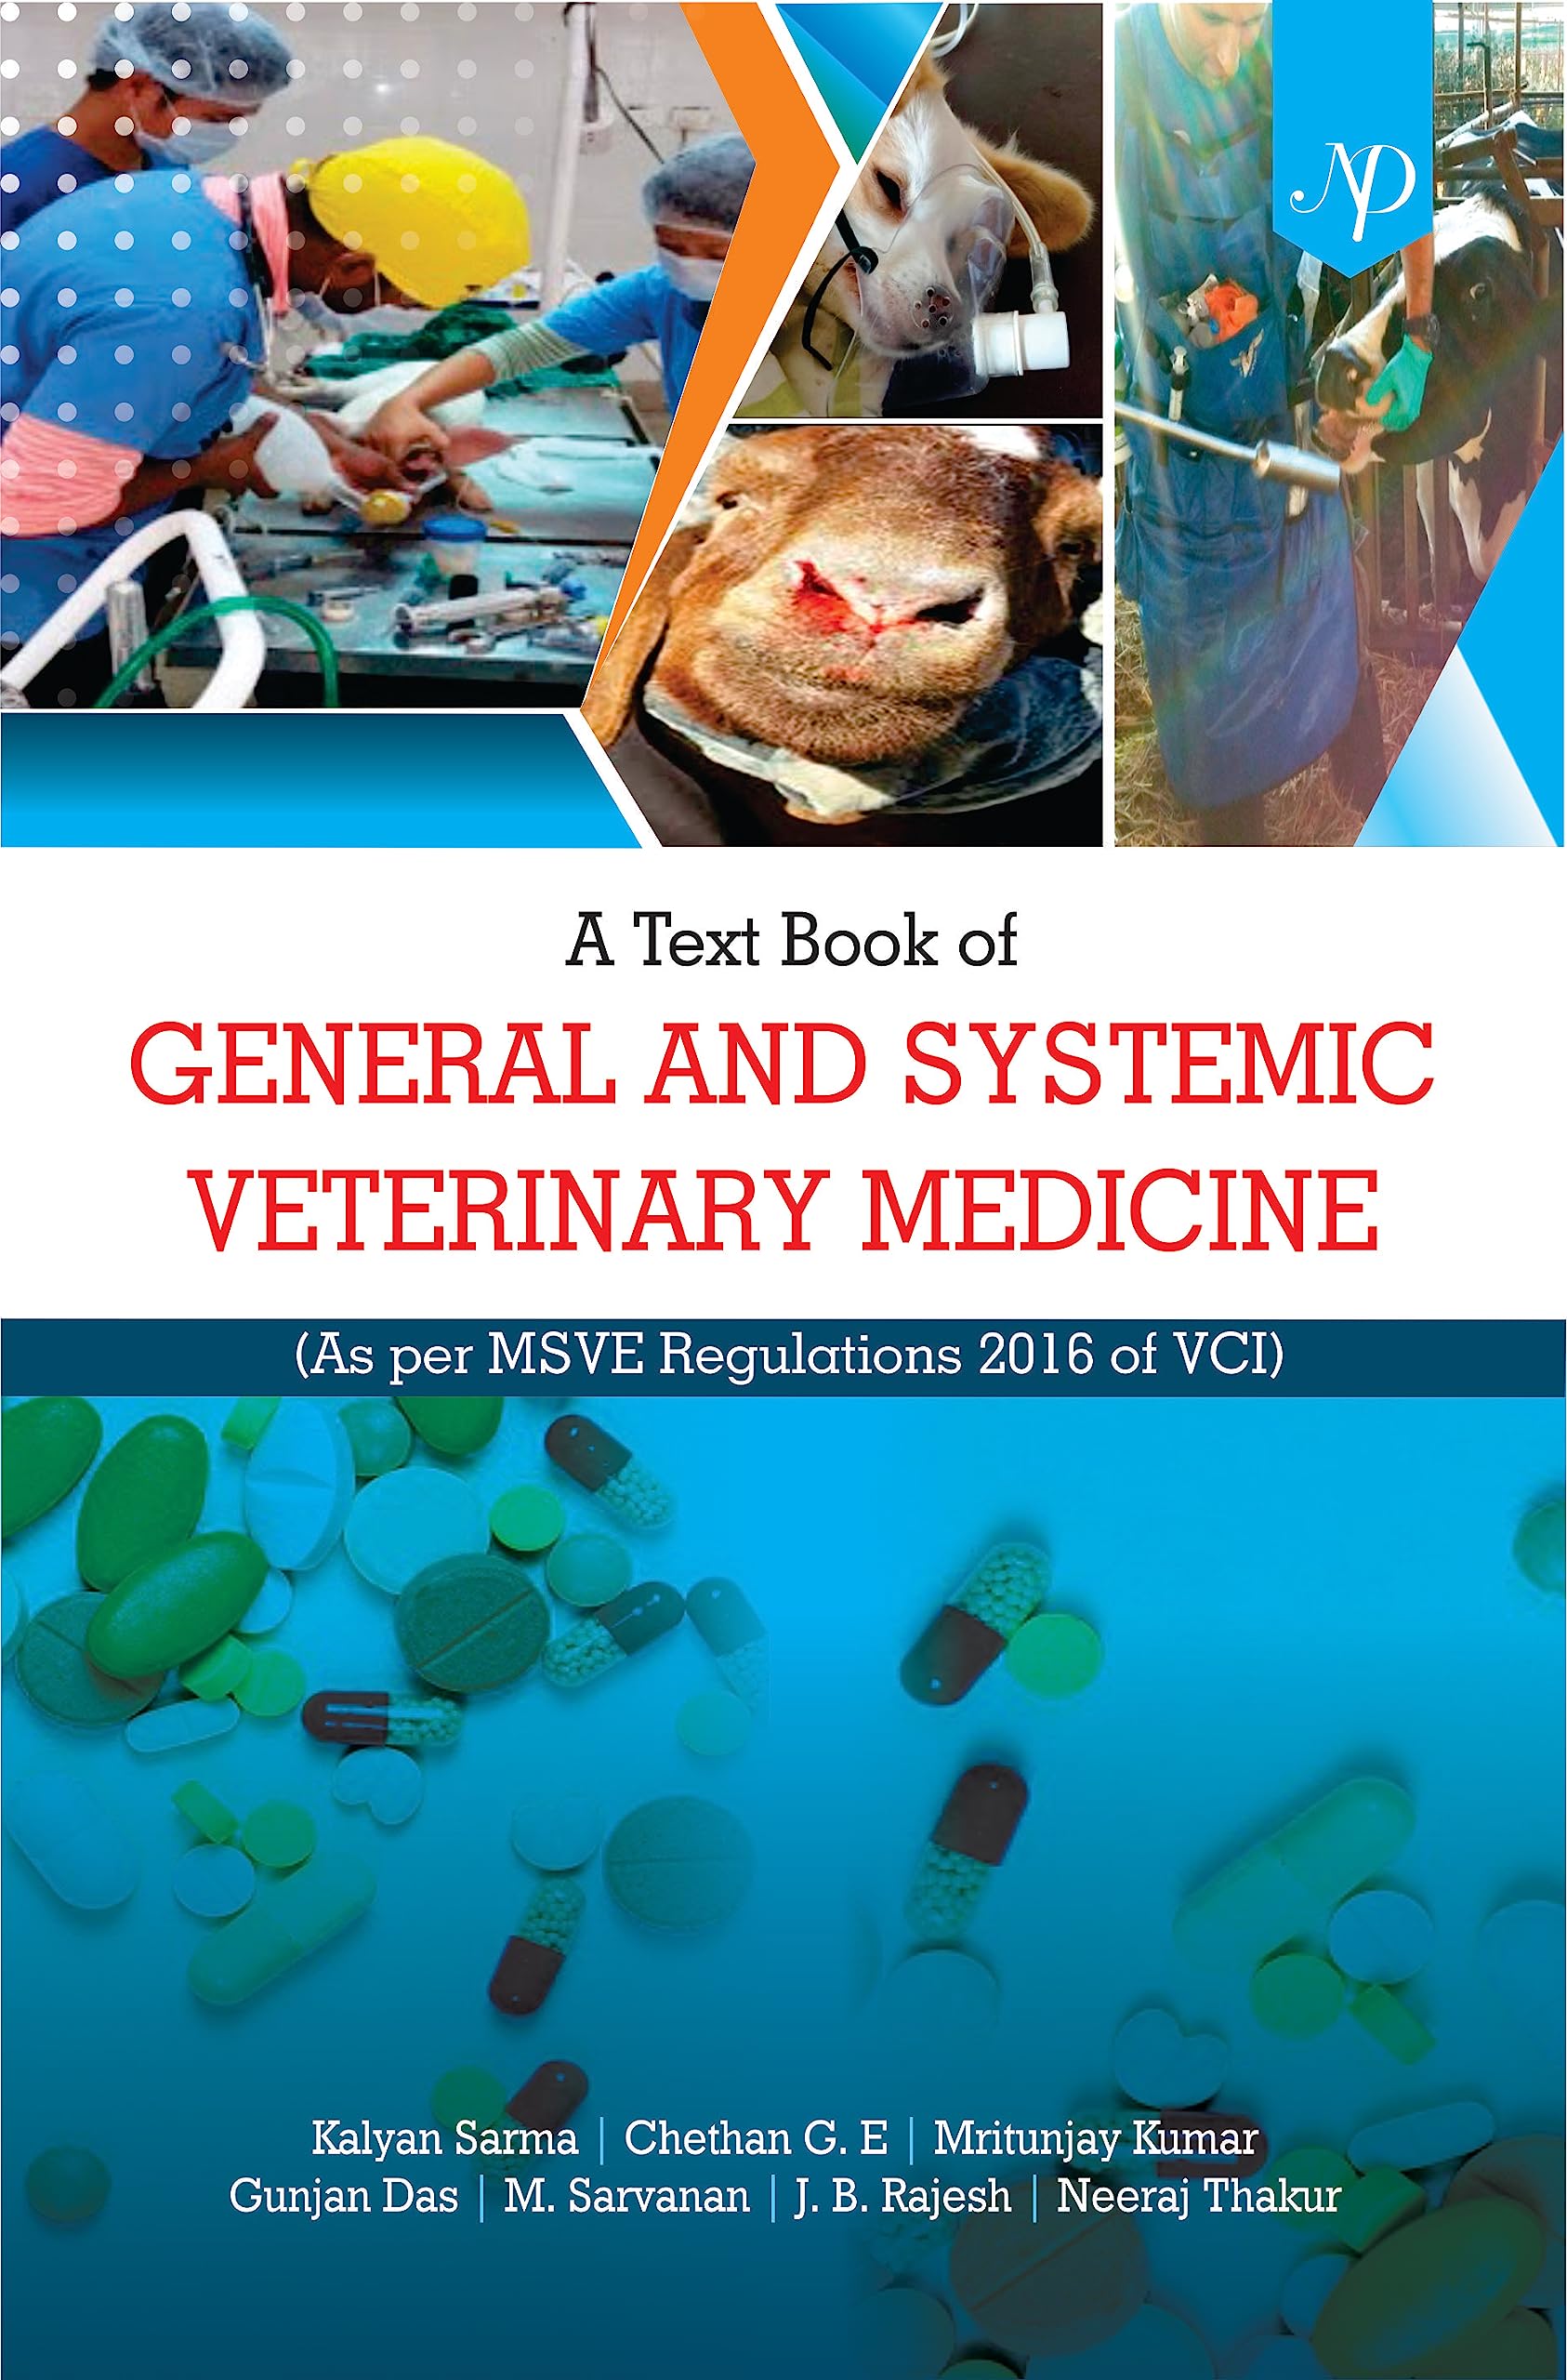 A Textbook of General and Systematic Veterinary Medicine